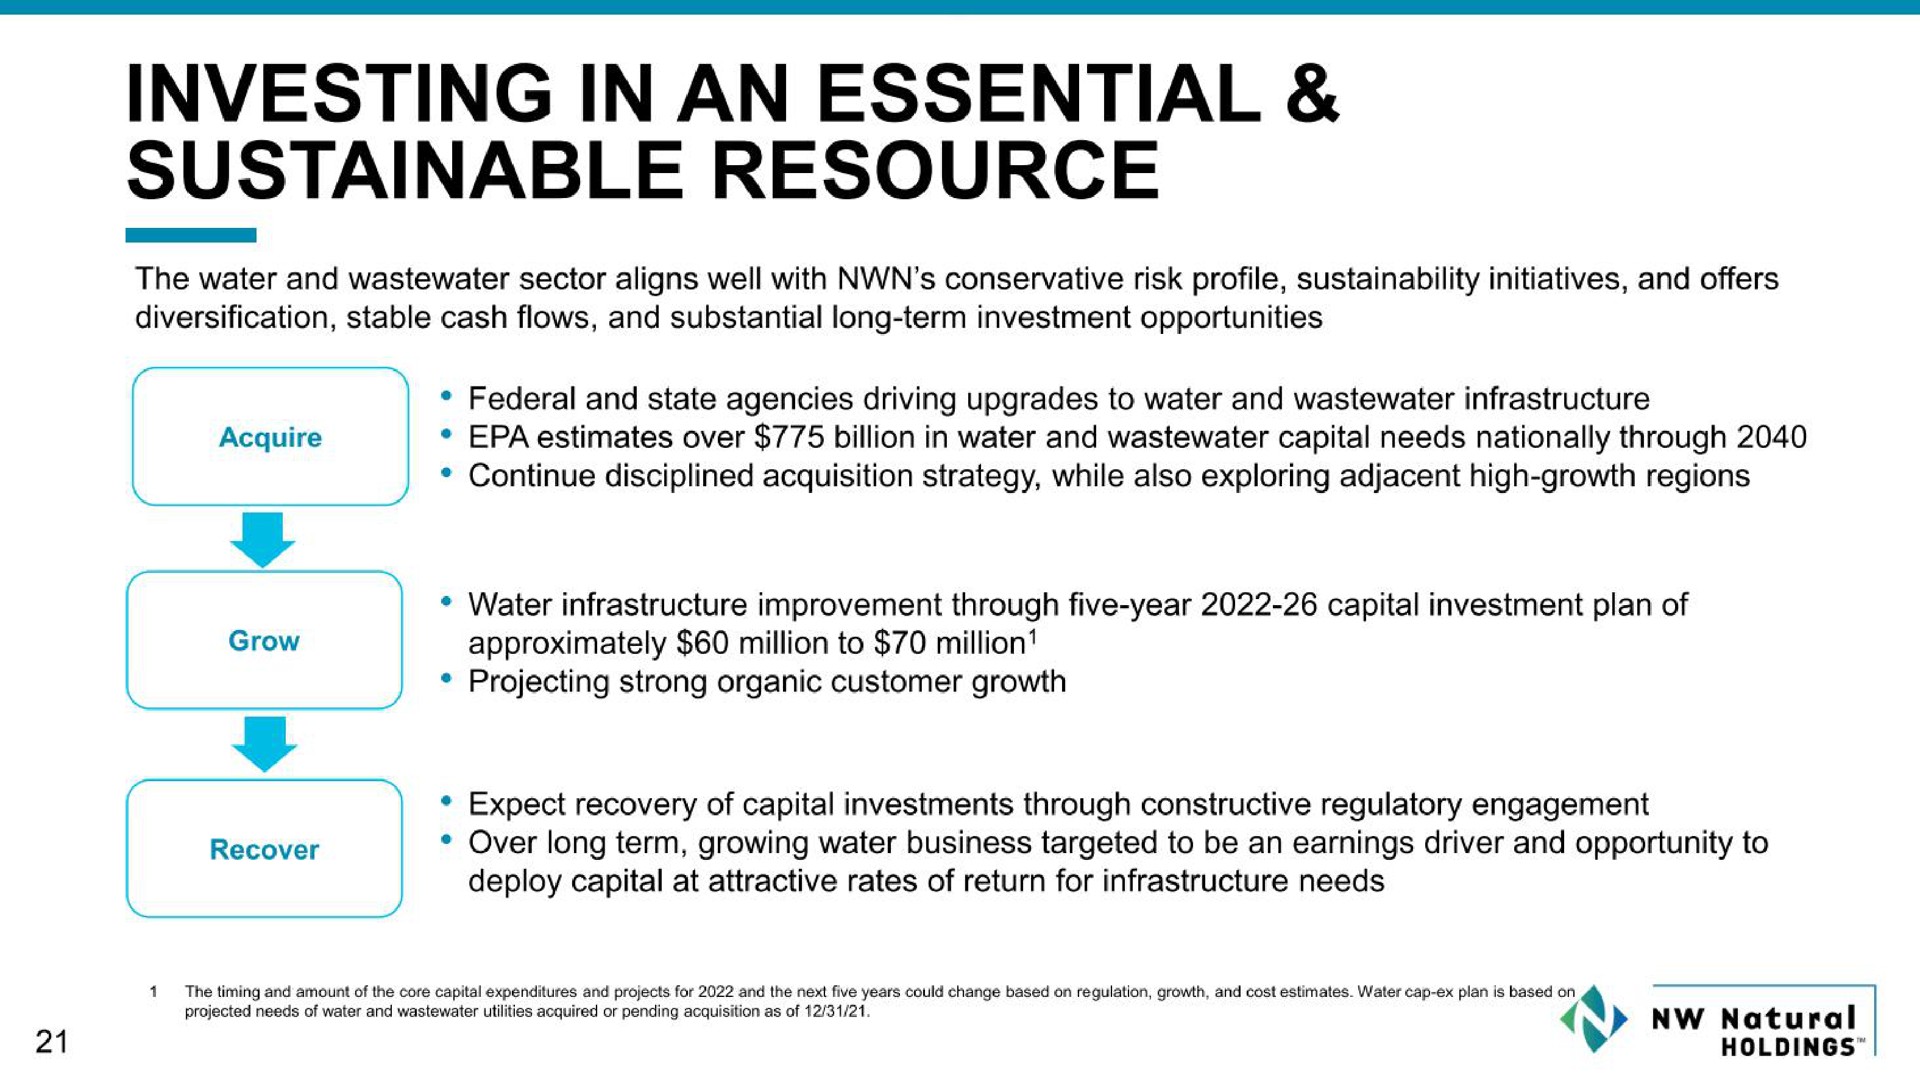 investing in an essential sustainable resource | NW Natural Holdings